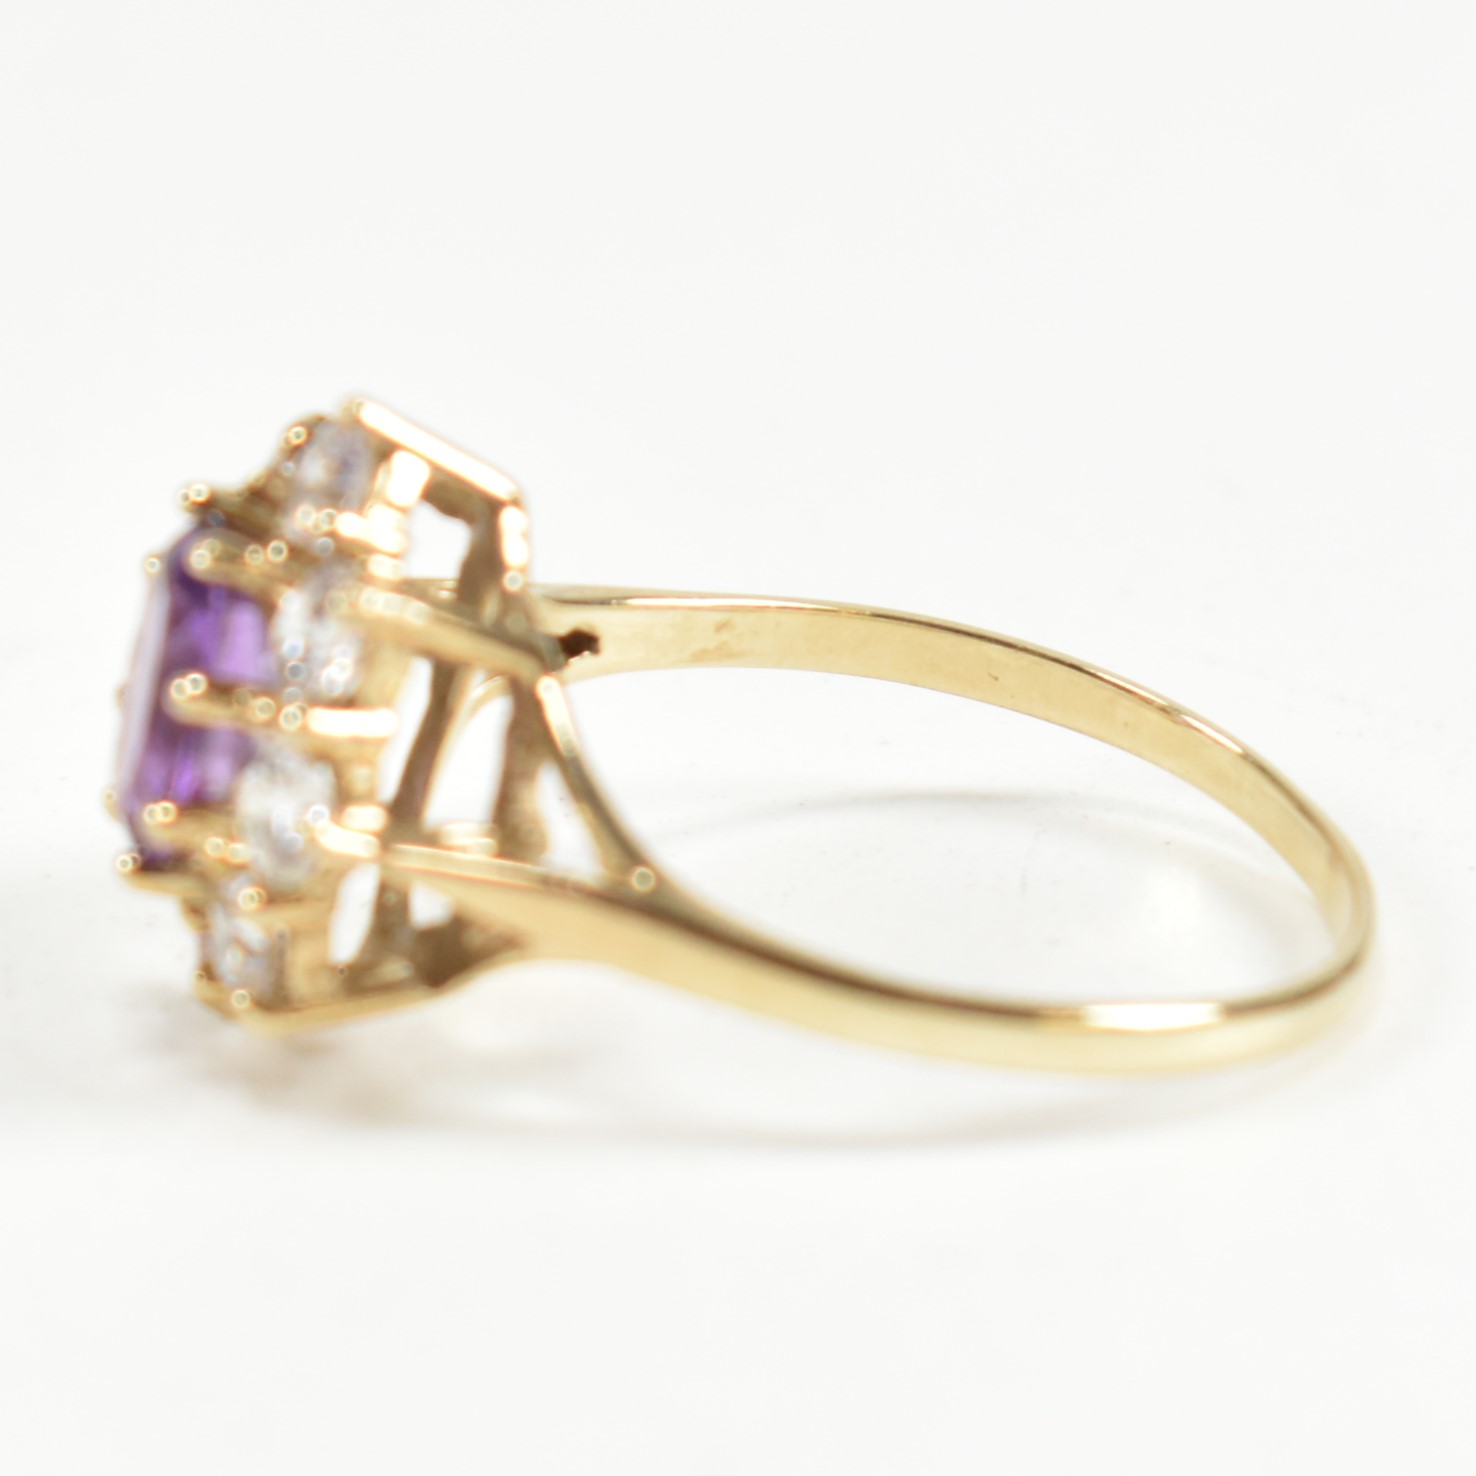 HALLMARKED 9CT GOLD AMETHYST & WHITE STONE CLUSTER RING - Image 6 of 9